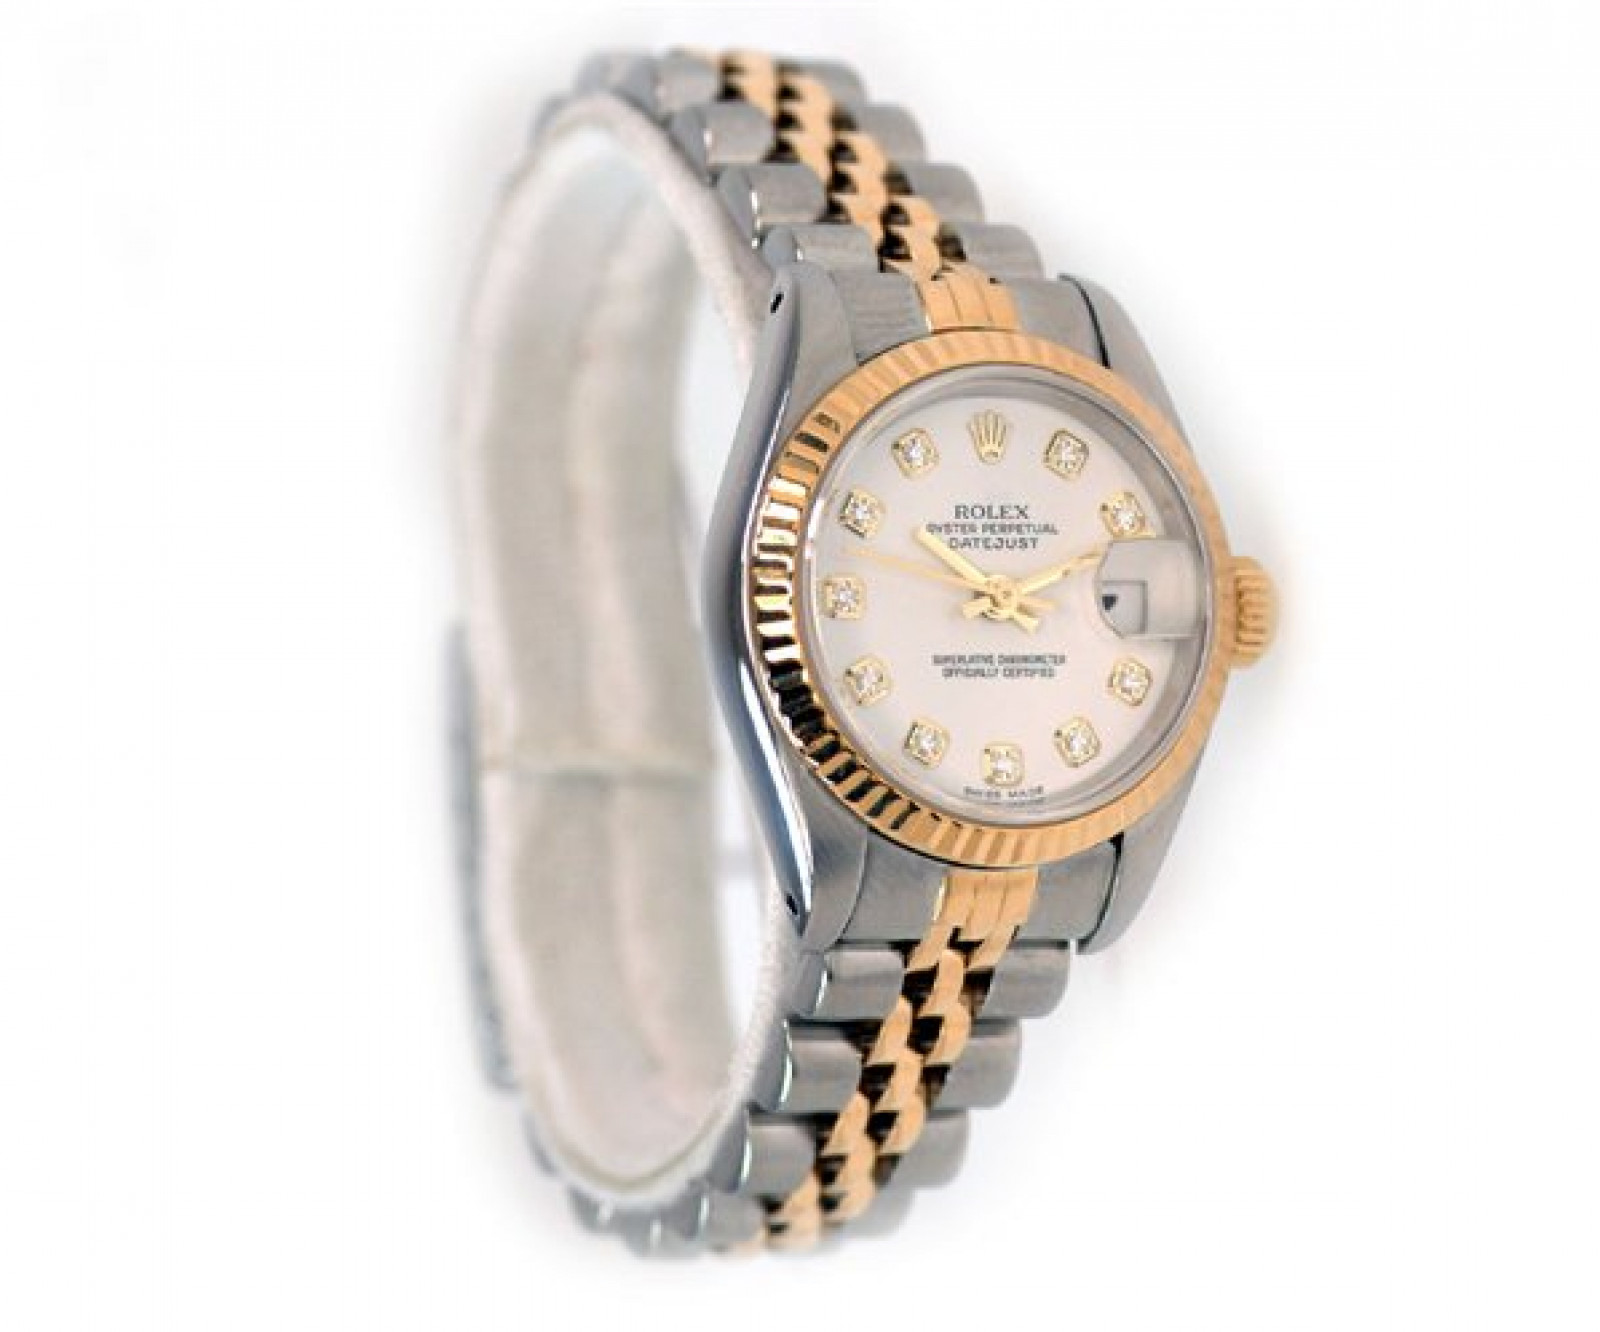 Pre-Owned Rolex Datejust 69173 with Diamonds